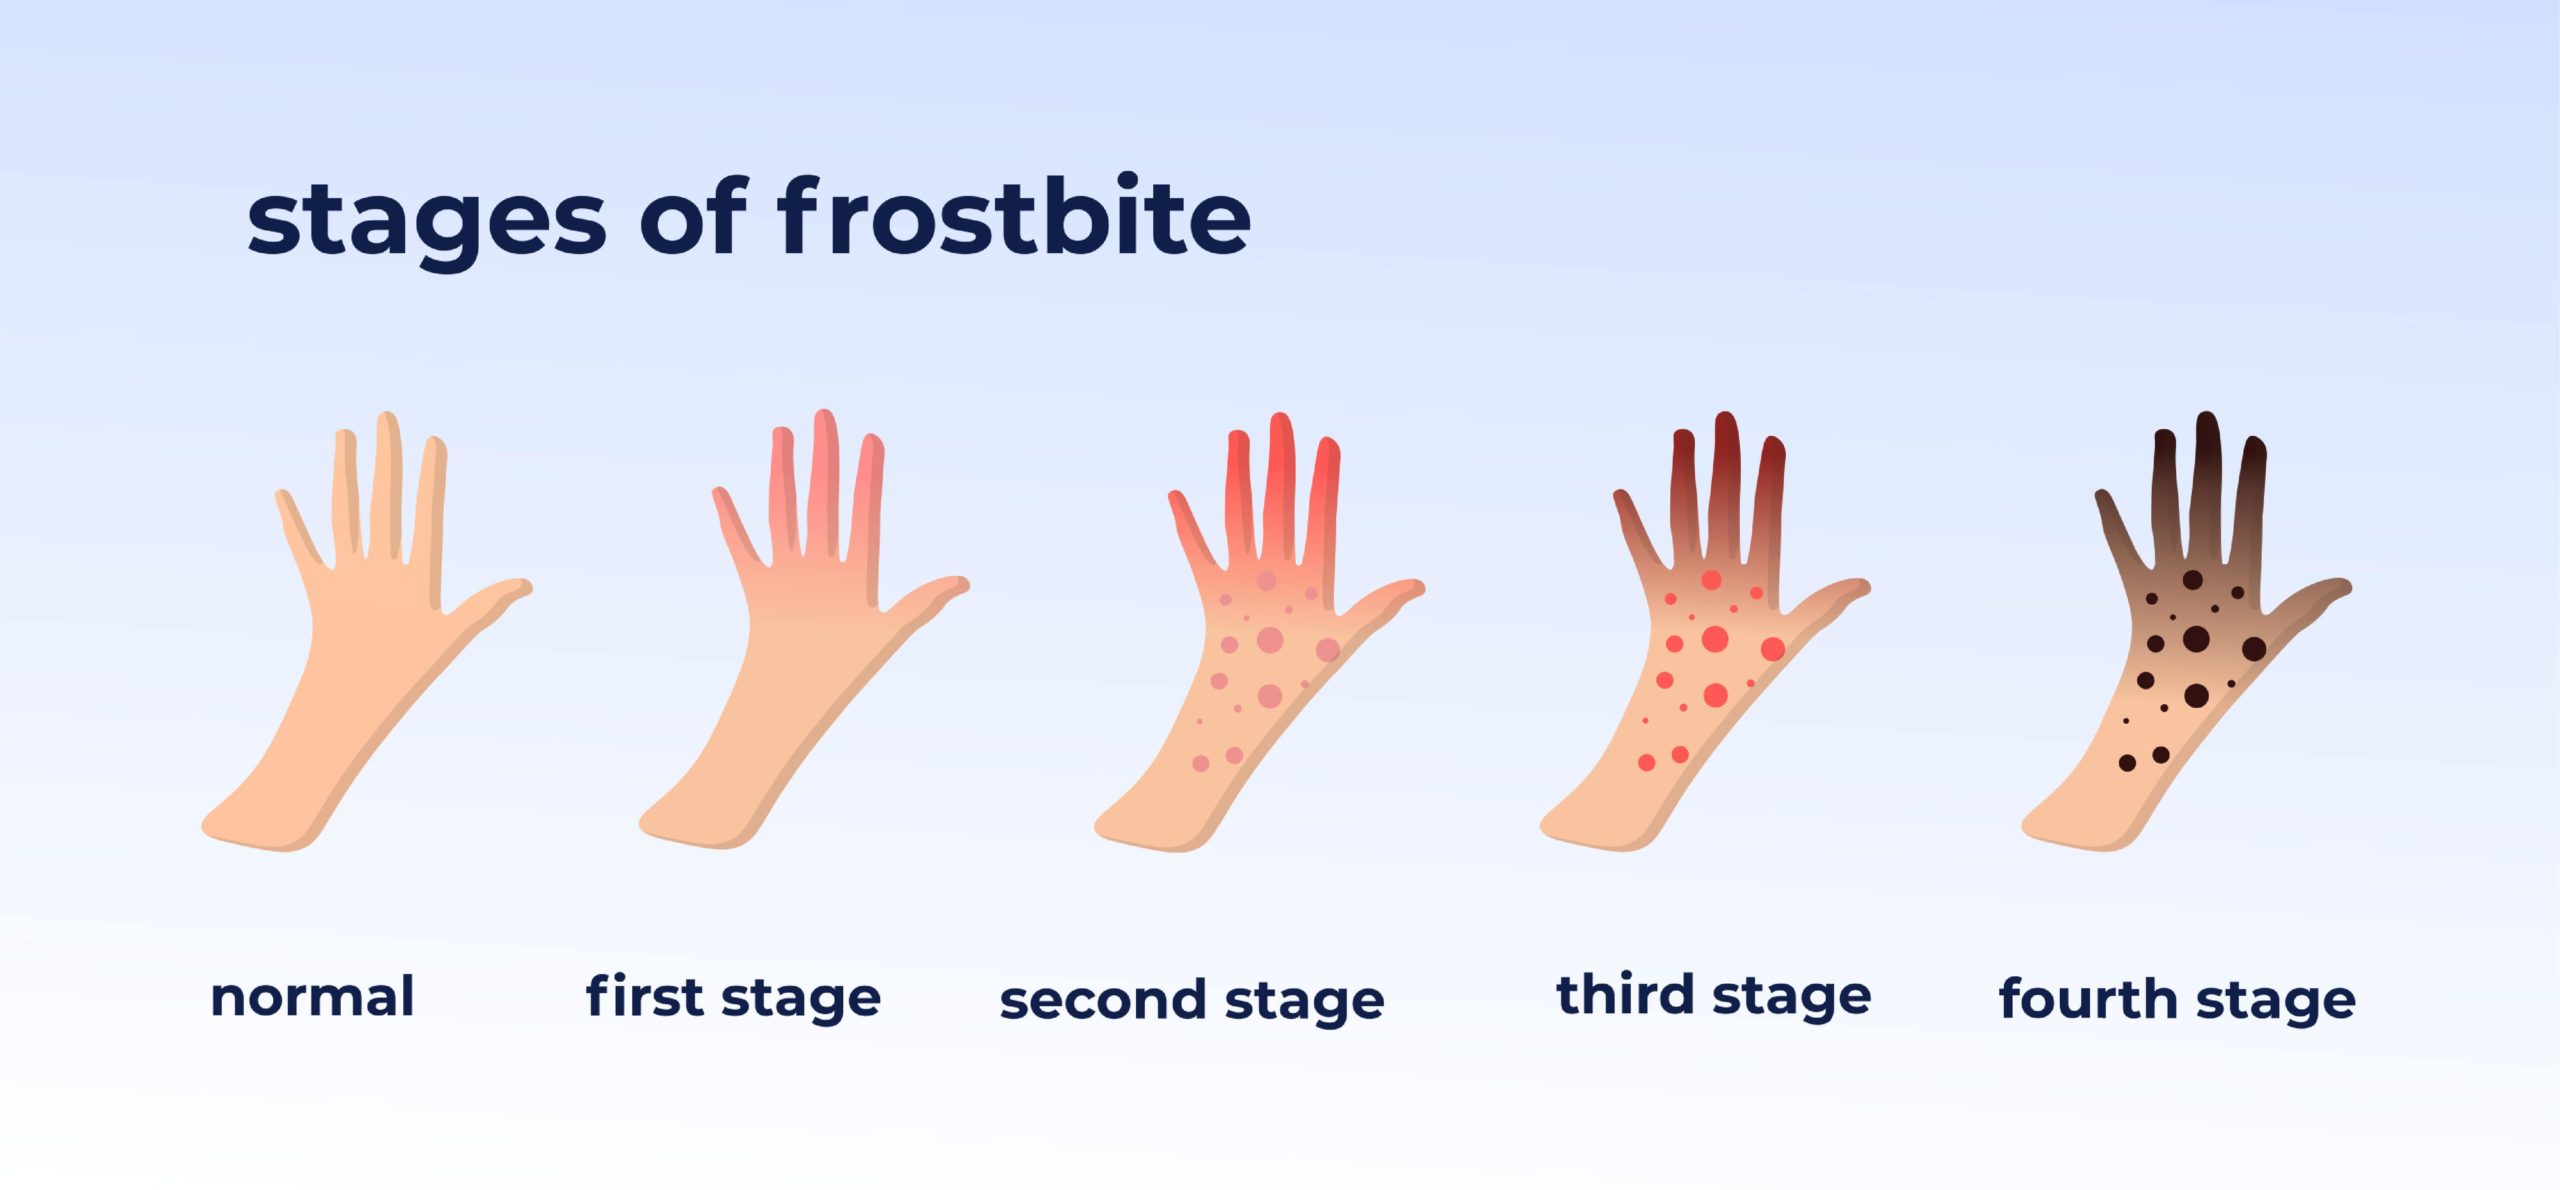 The 5 stages of frostbite